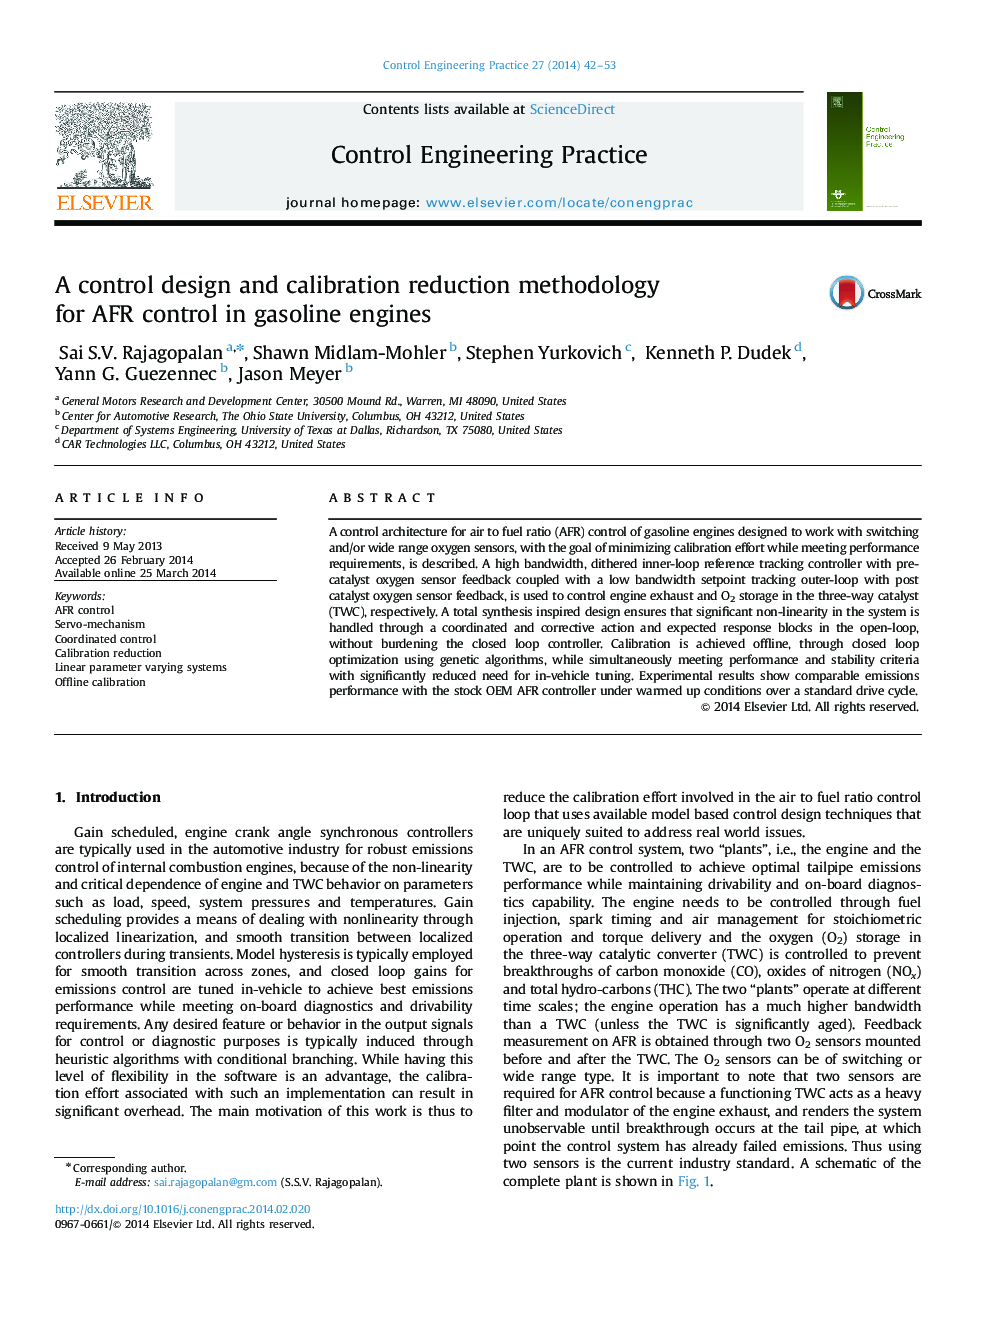 A control design and calibration reduction methodology for AFR control in gasoline engines